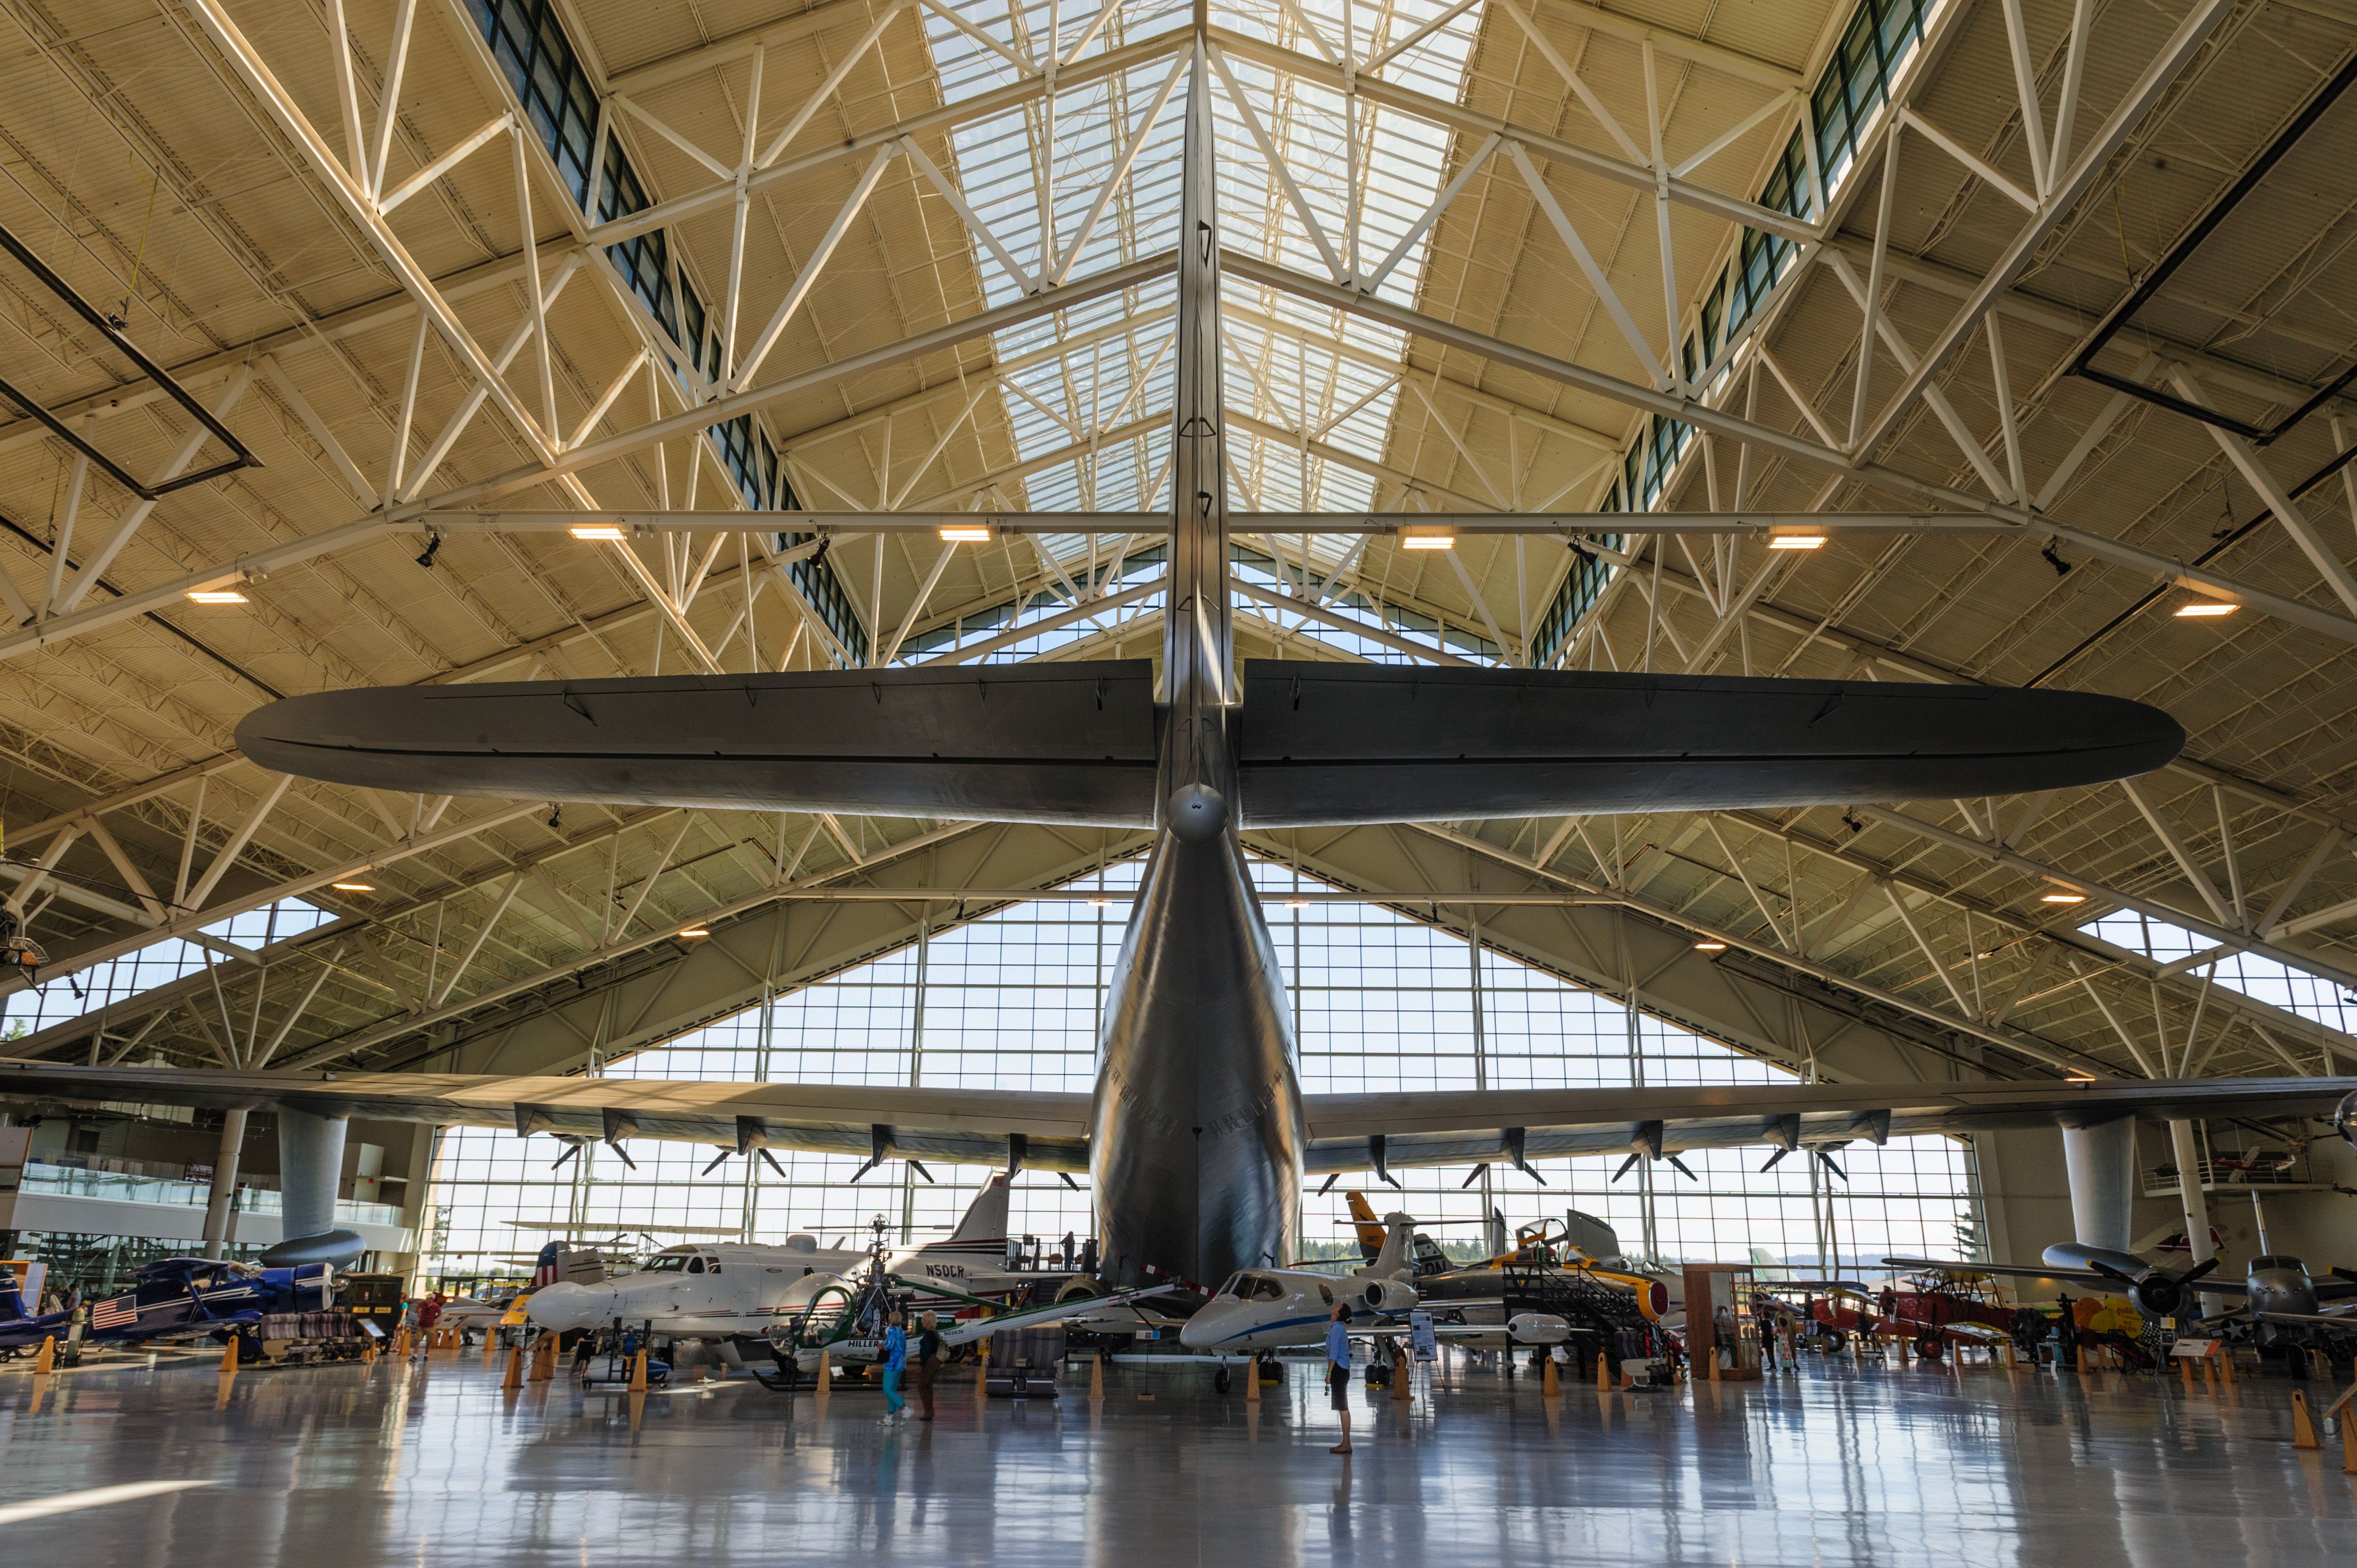 The Spruce Goose on display in the Evergreen aviation Museum in McMinville, Oregon. The Spruce Goose is the Largest Propeller Aircraft ever build, developed in WWII.